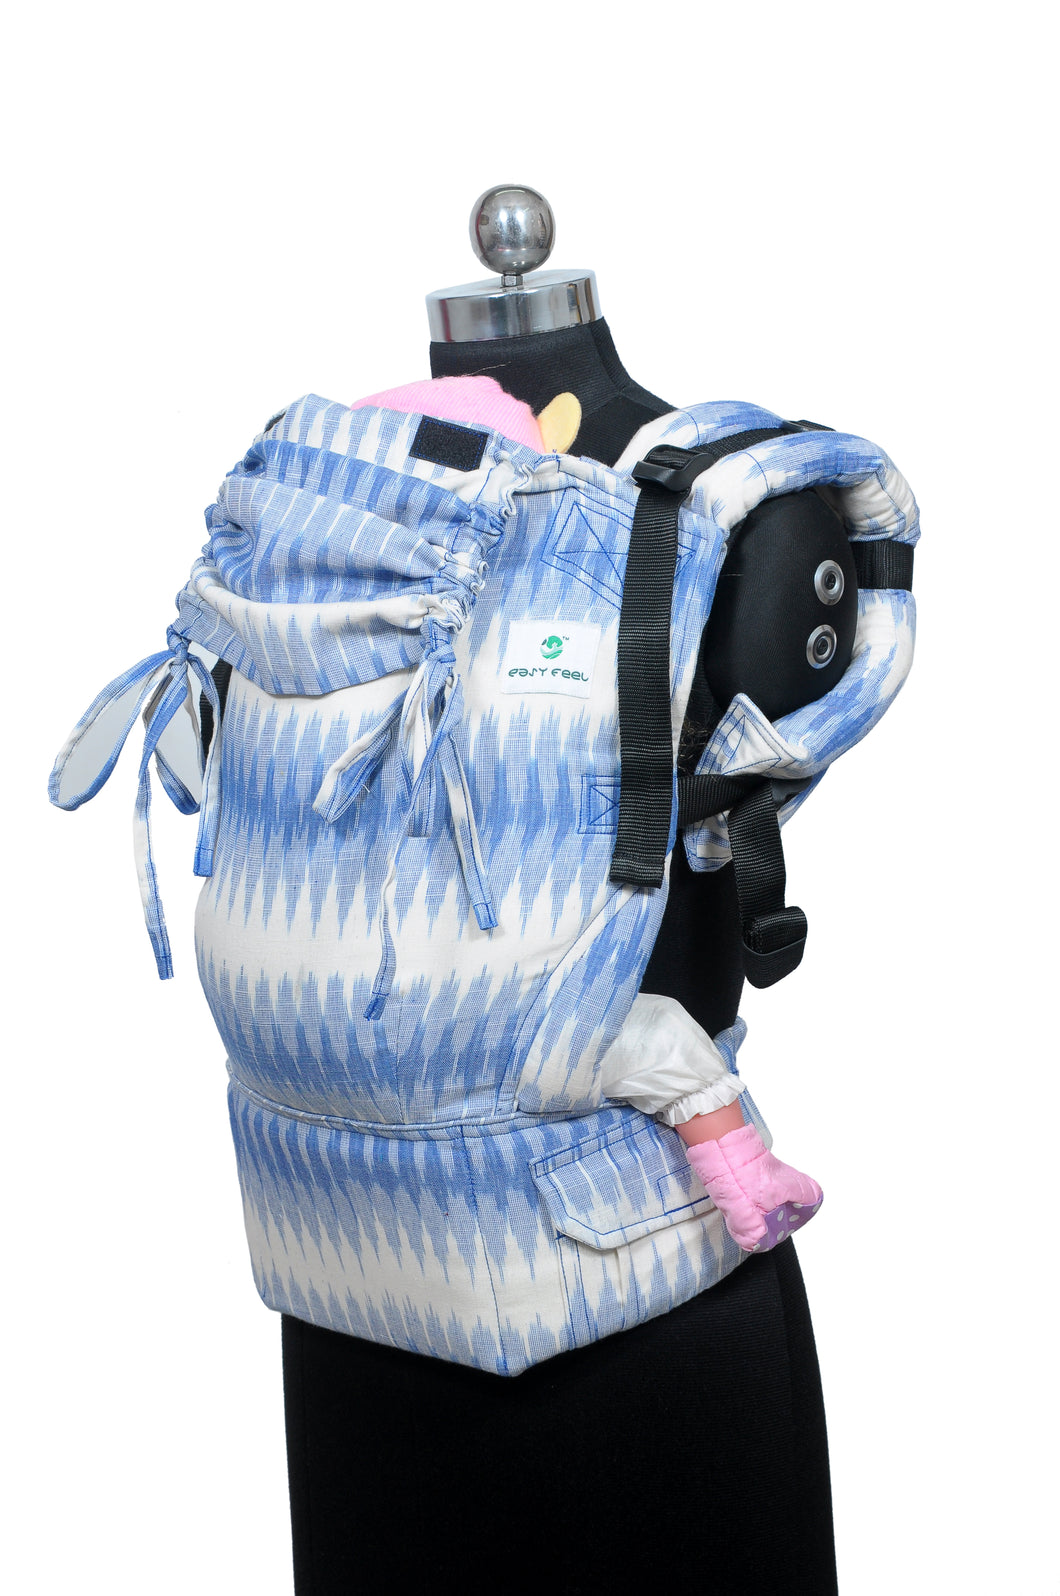 Standard Wrap Converted Soft Structured Carrier - Stratus